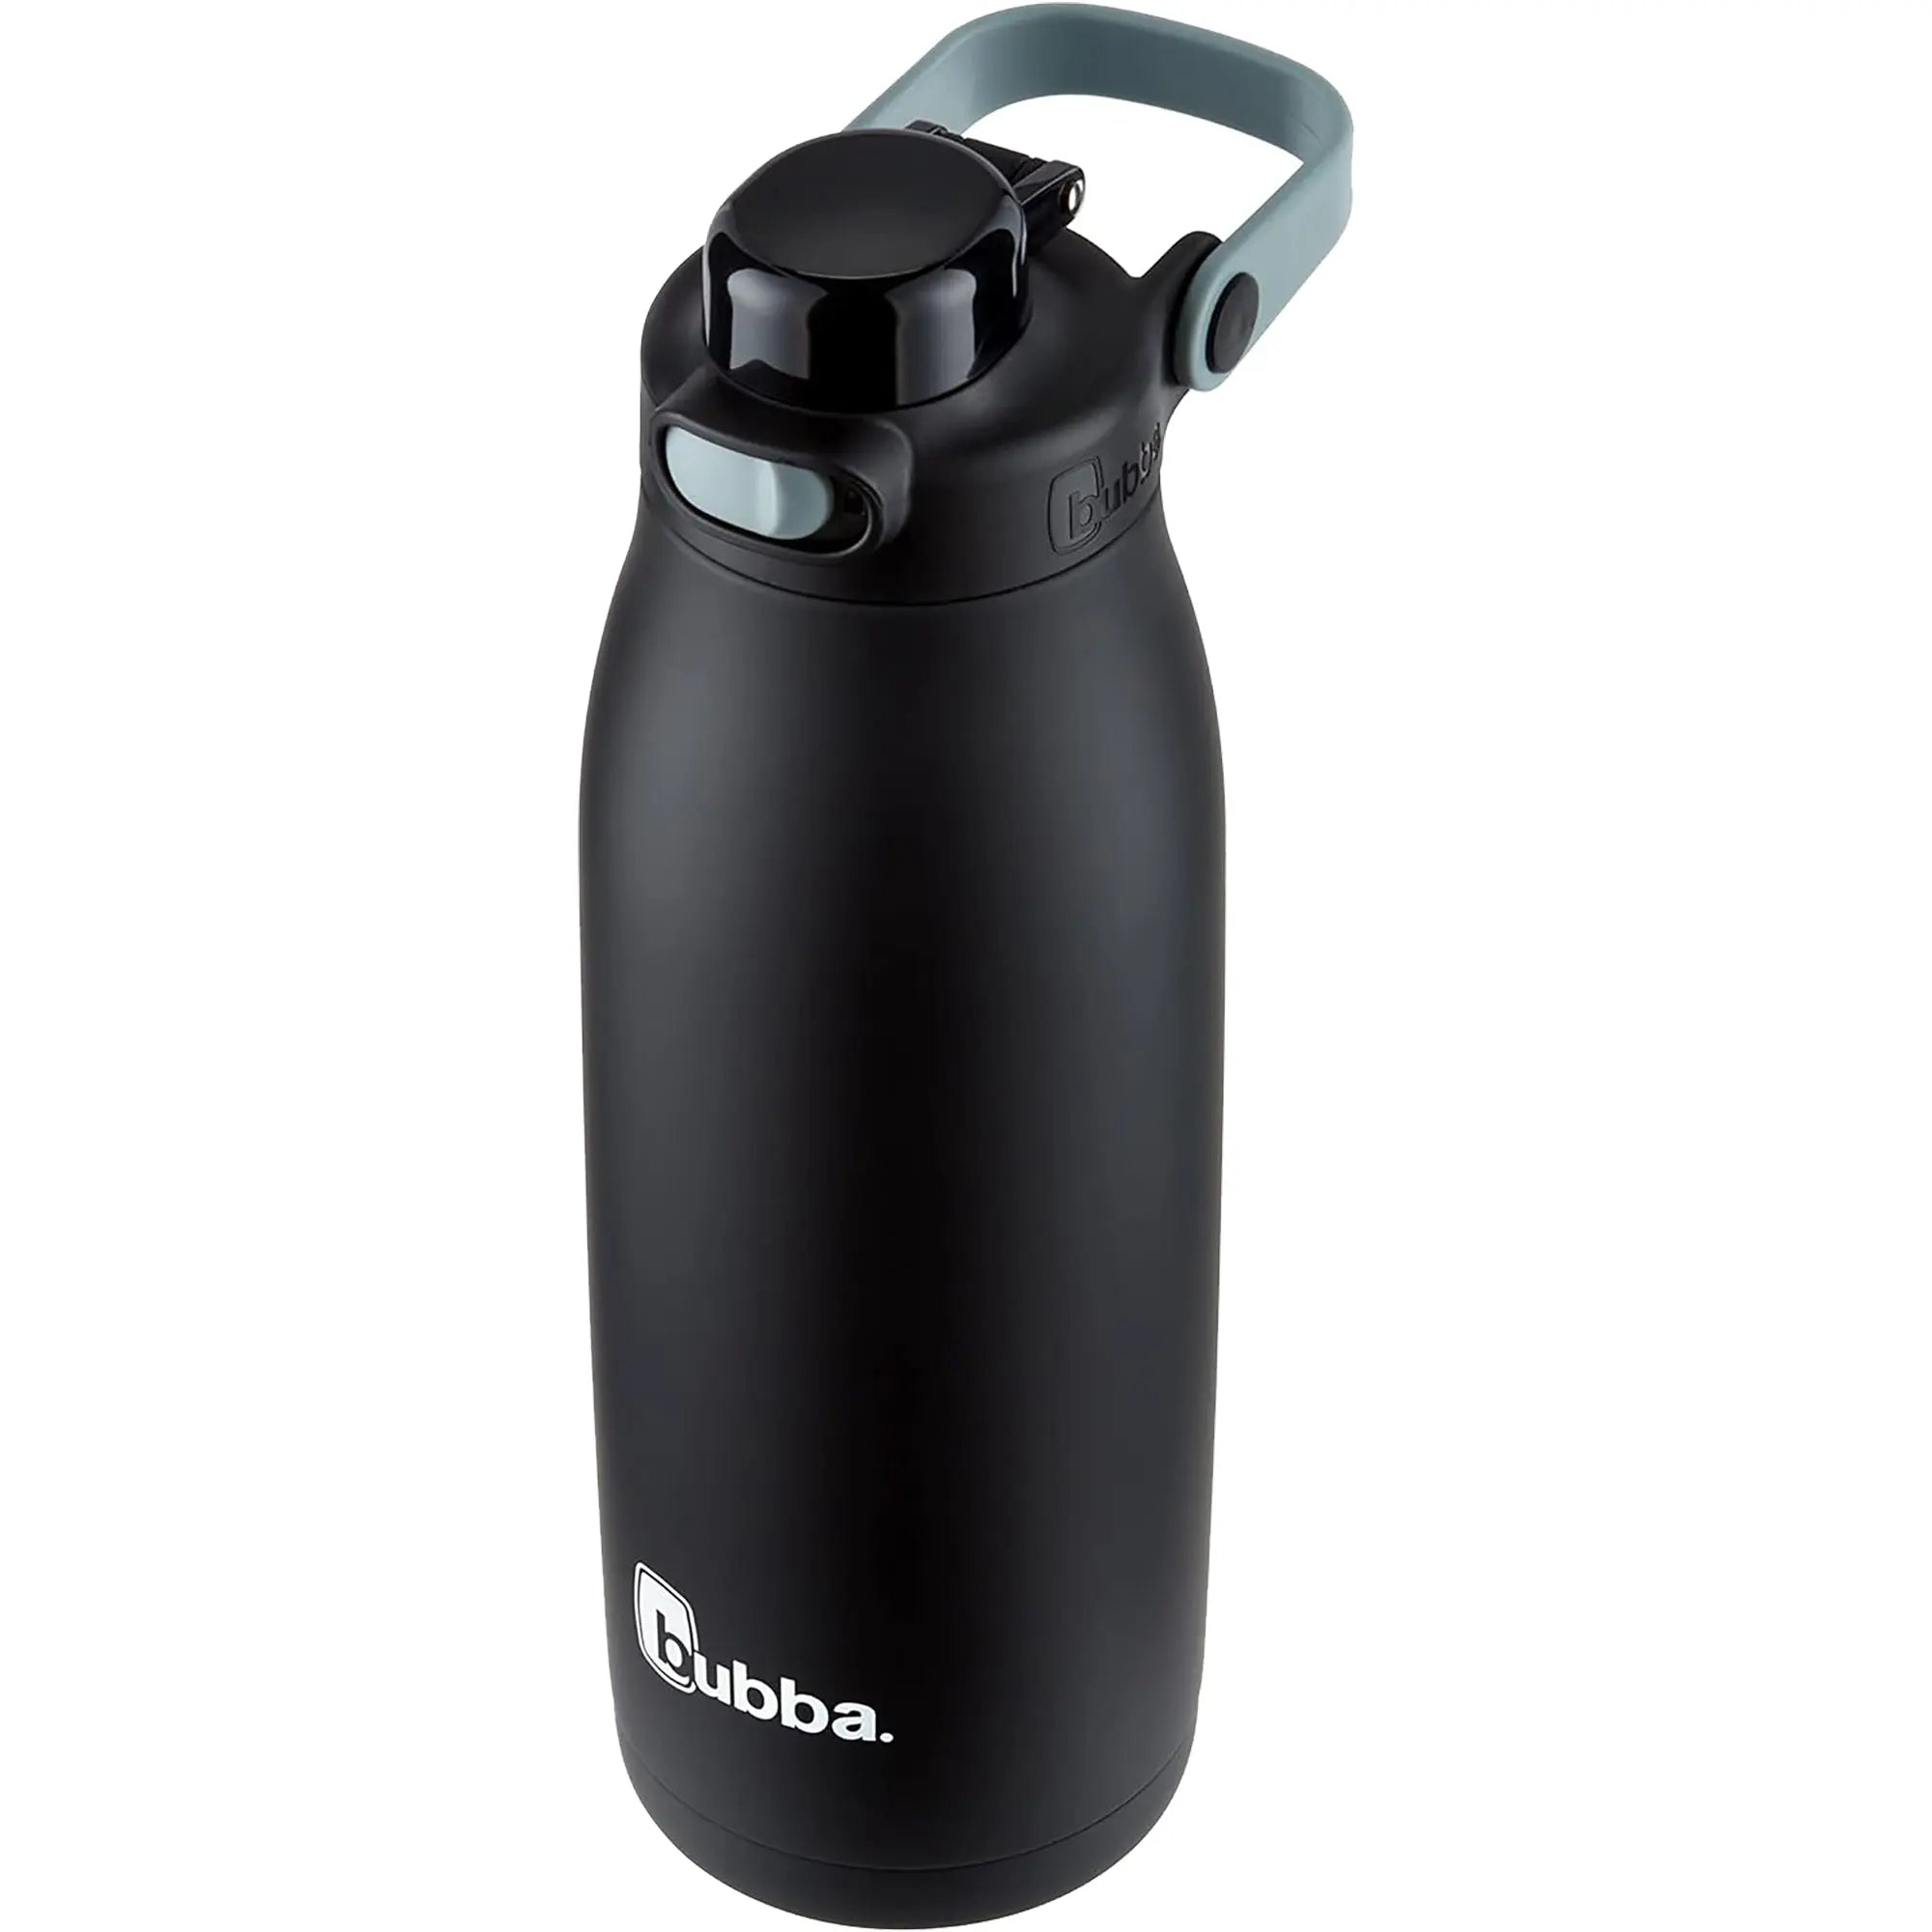 Bubba 32 oz. Radiant Vacuum Insulated Stainless Steel Rubberized Water Bottle Bubba